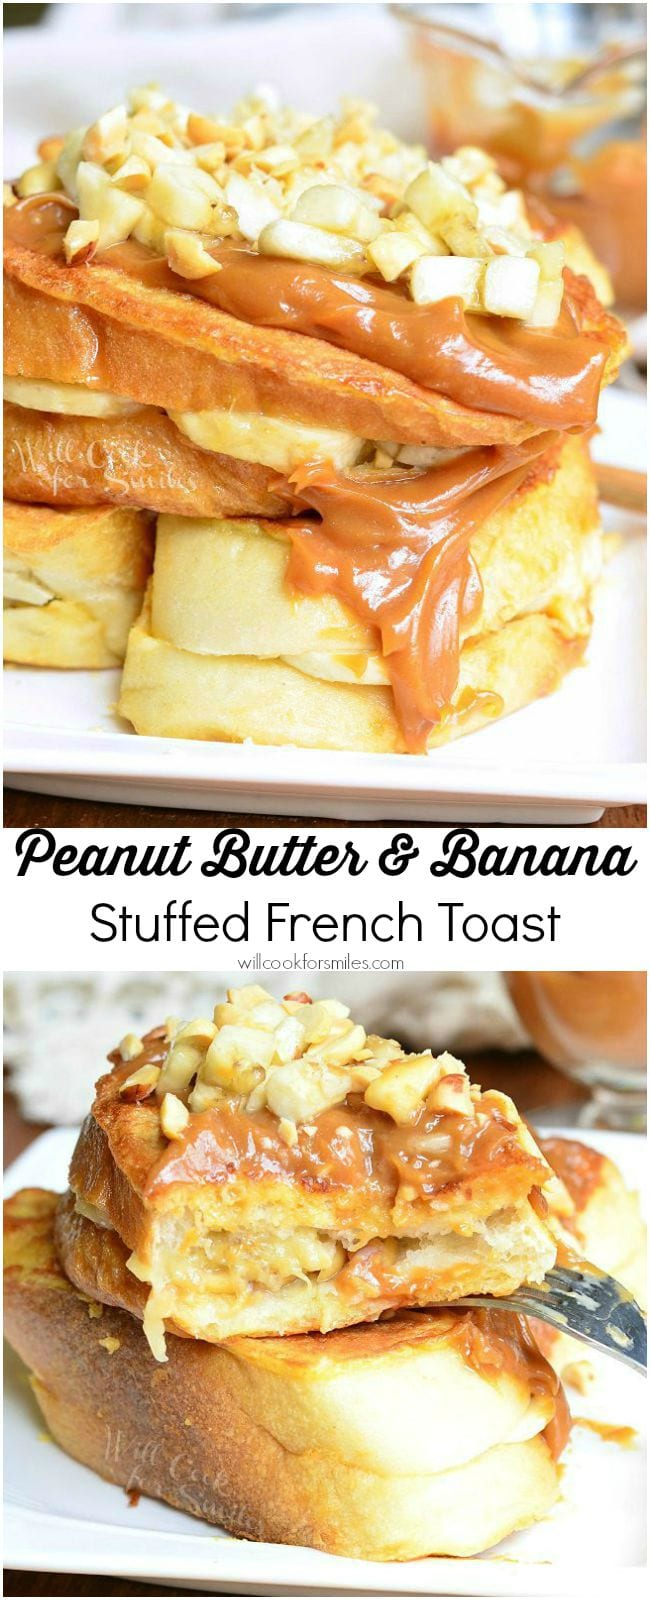 Two photos: Top photos is of stacked Peanut Butter Banana Stuffed French Toast served on a white dish. Peanut butter sauce is smothered on top and goes down the side. Chopped peanuts and banana pieces are also on top. Bottom photo shows the top french toast piece cut to show the filling.